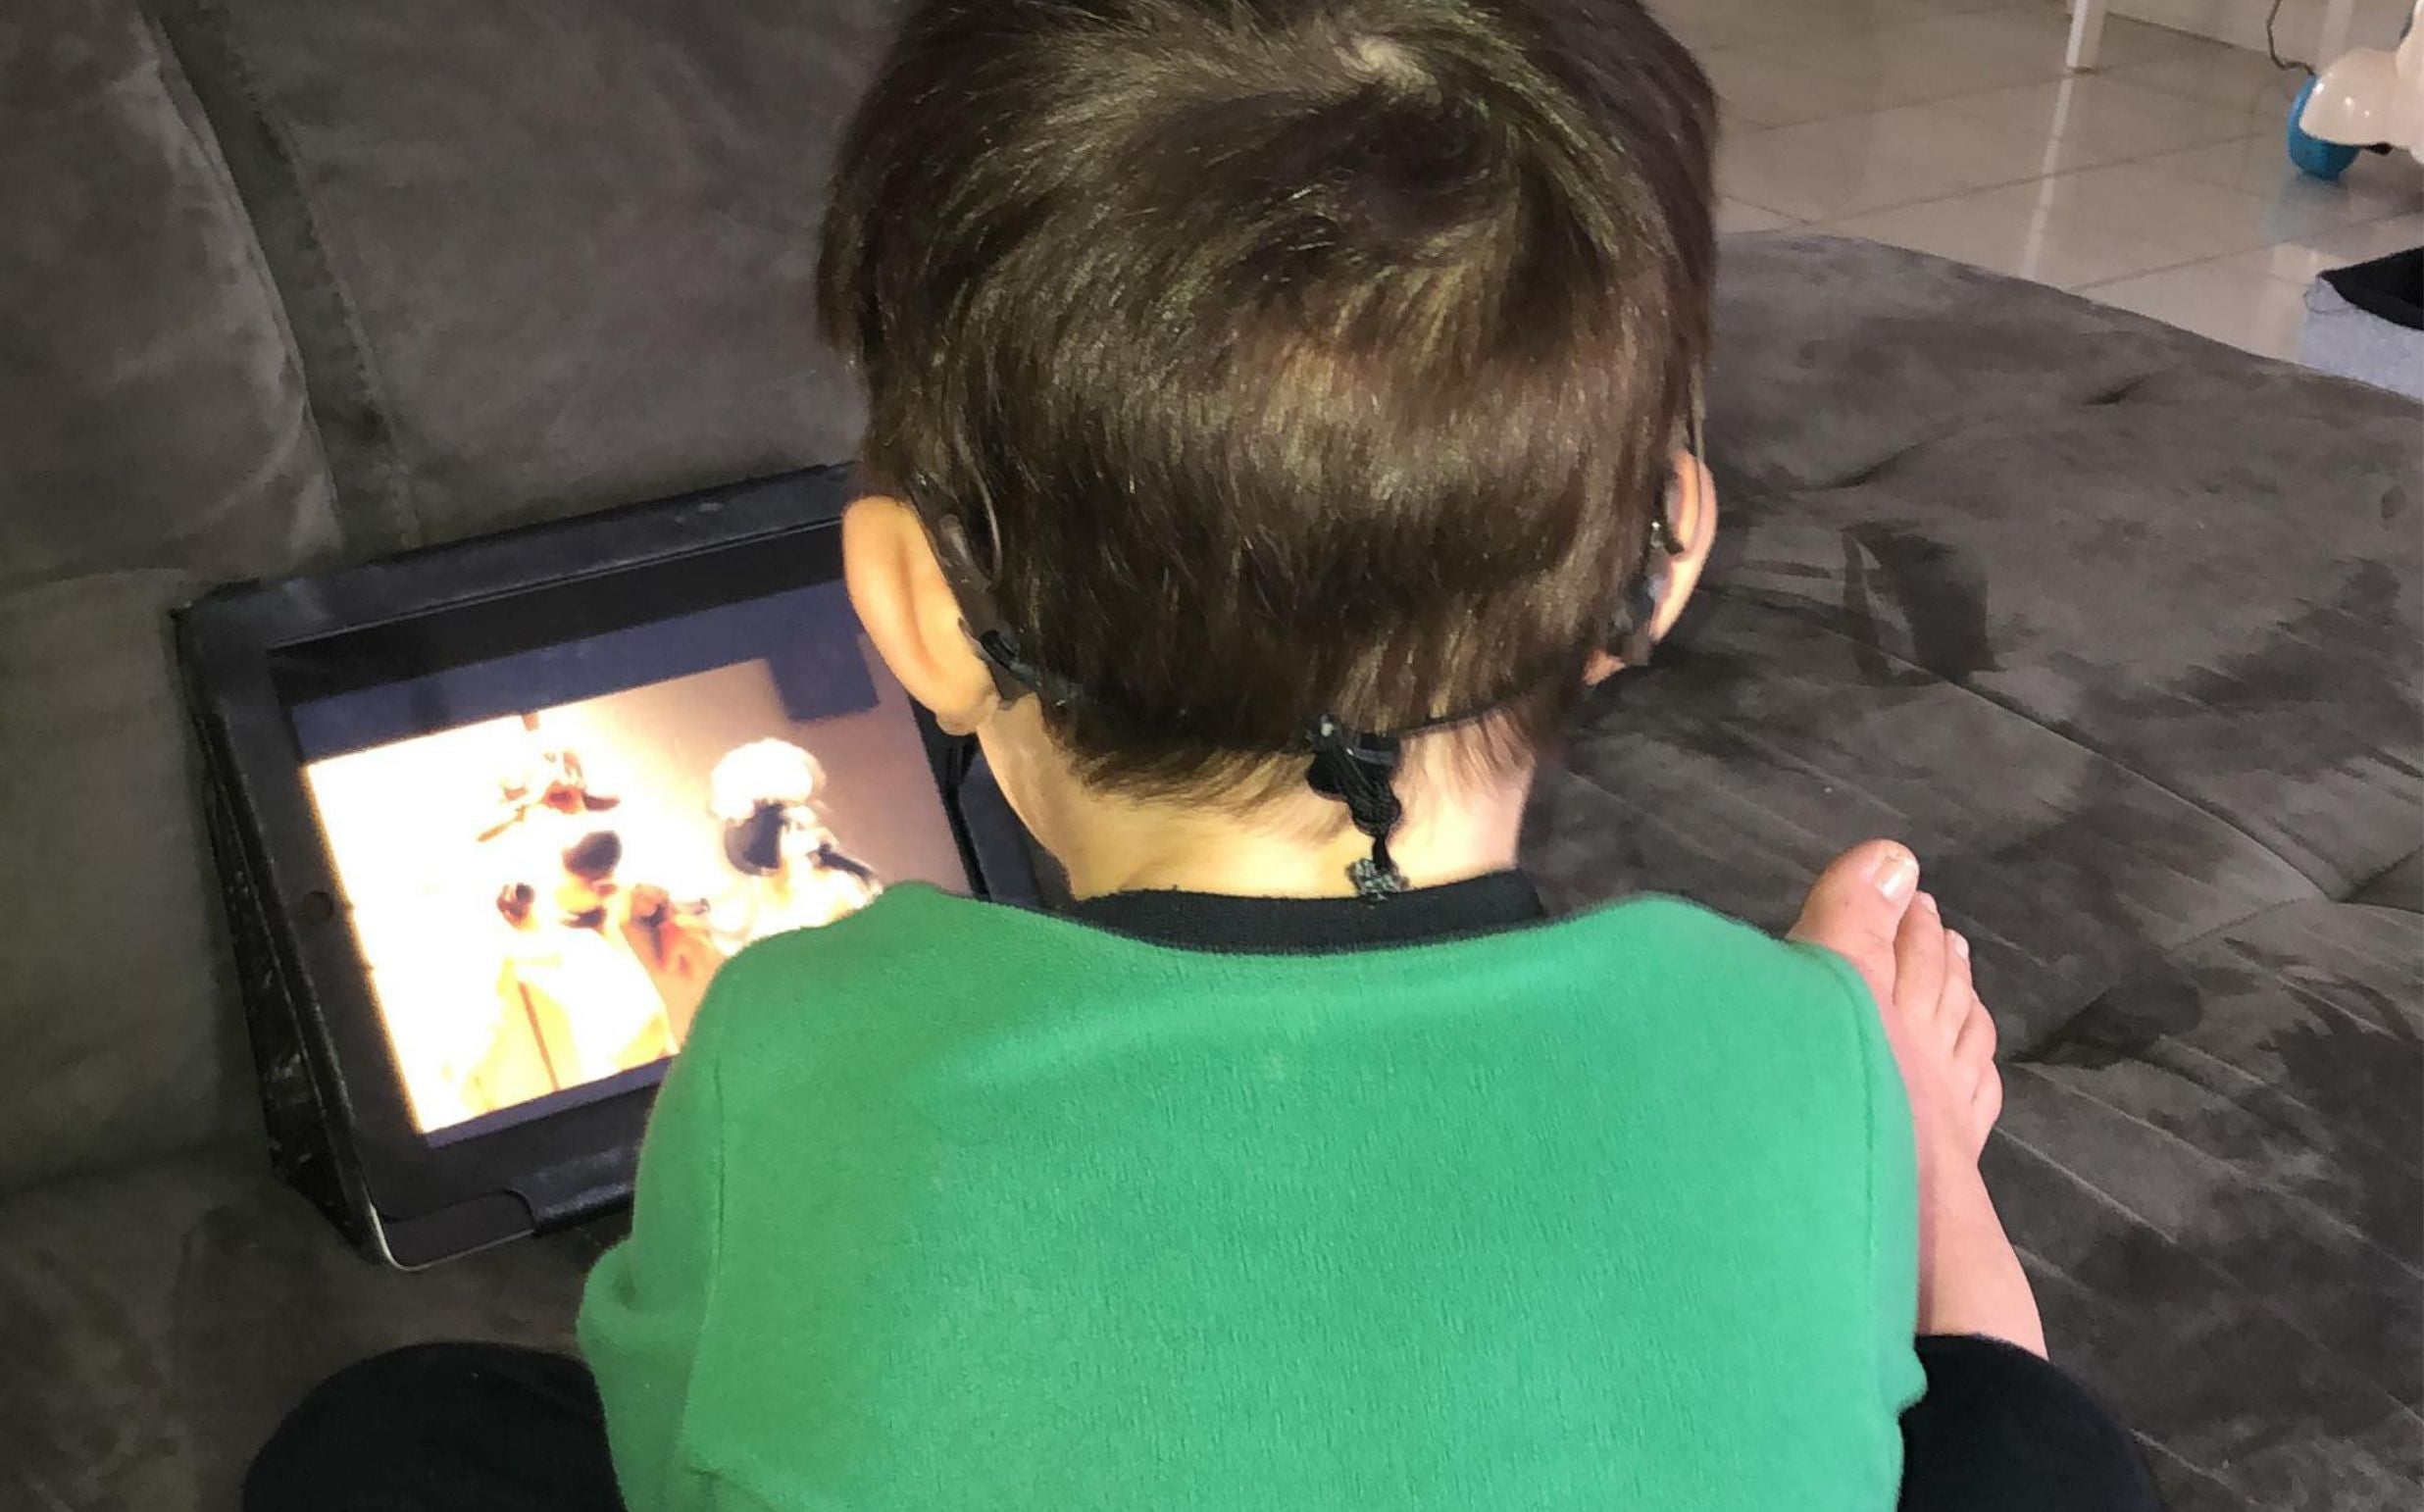 Little boy sits in a green t-shirt playing on a tablet with 2 hearing devices.